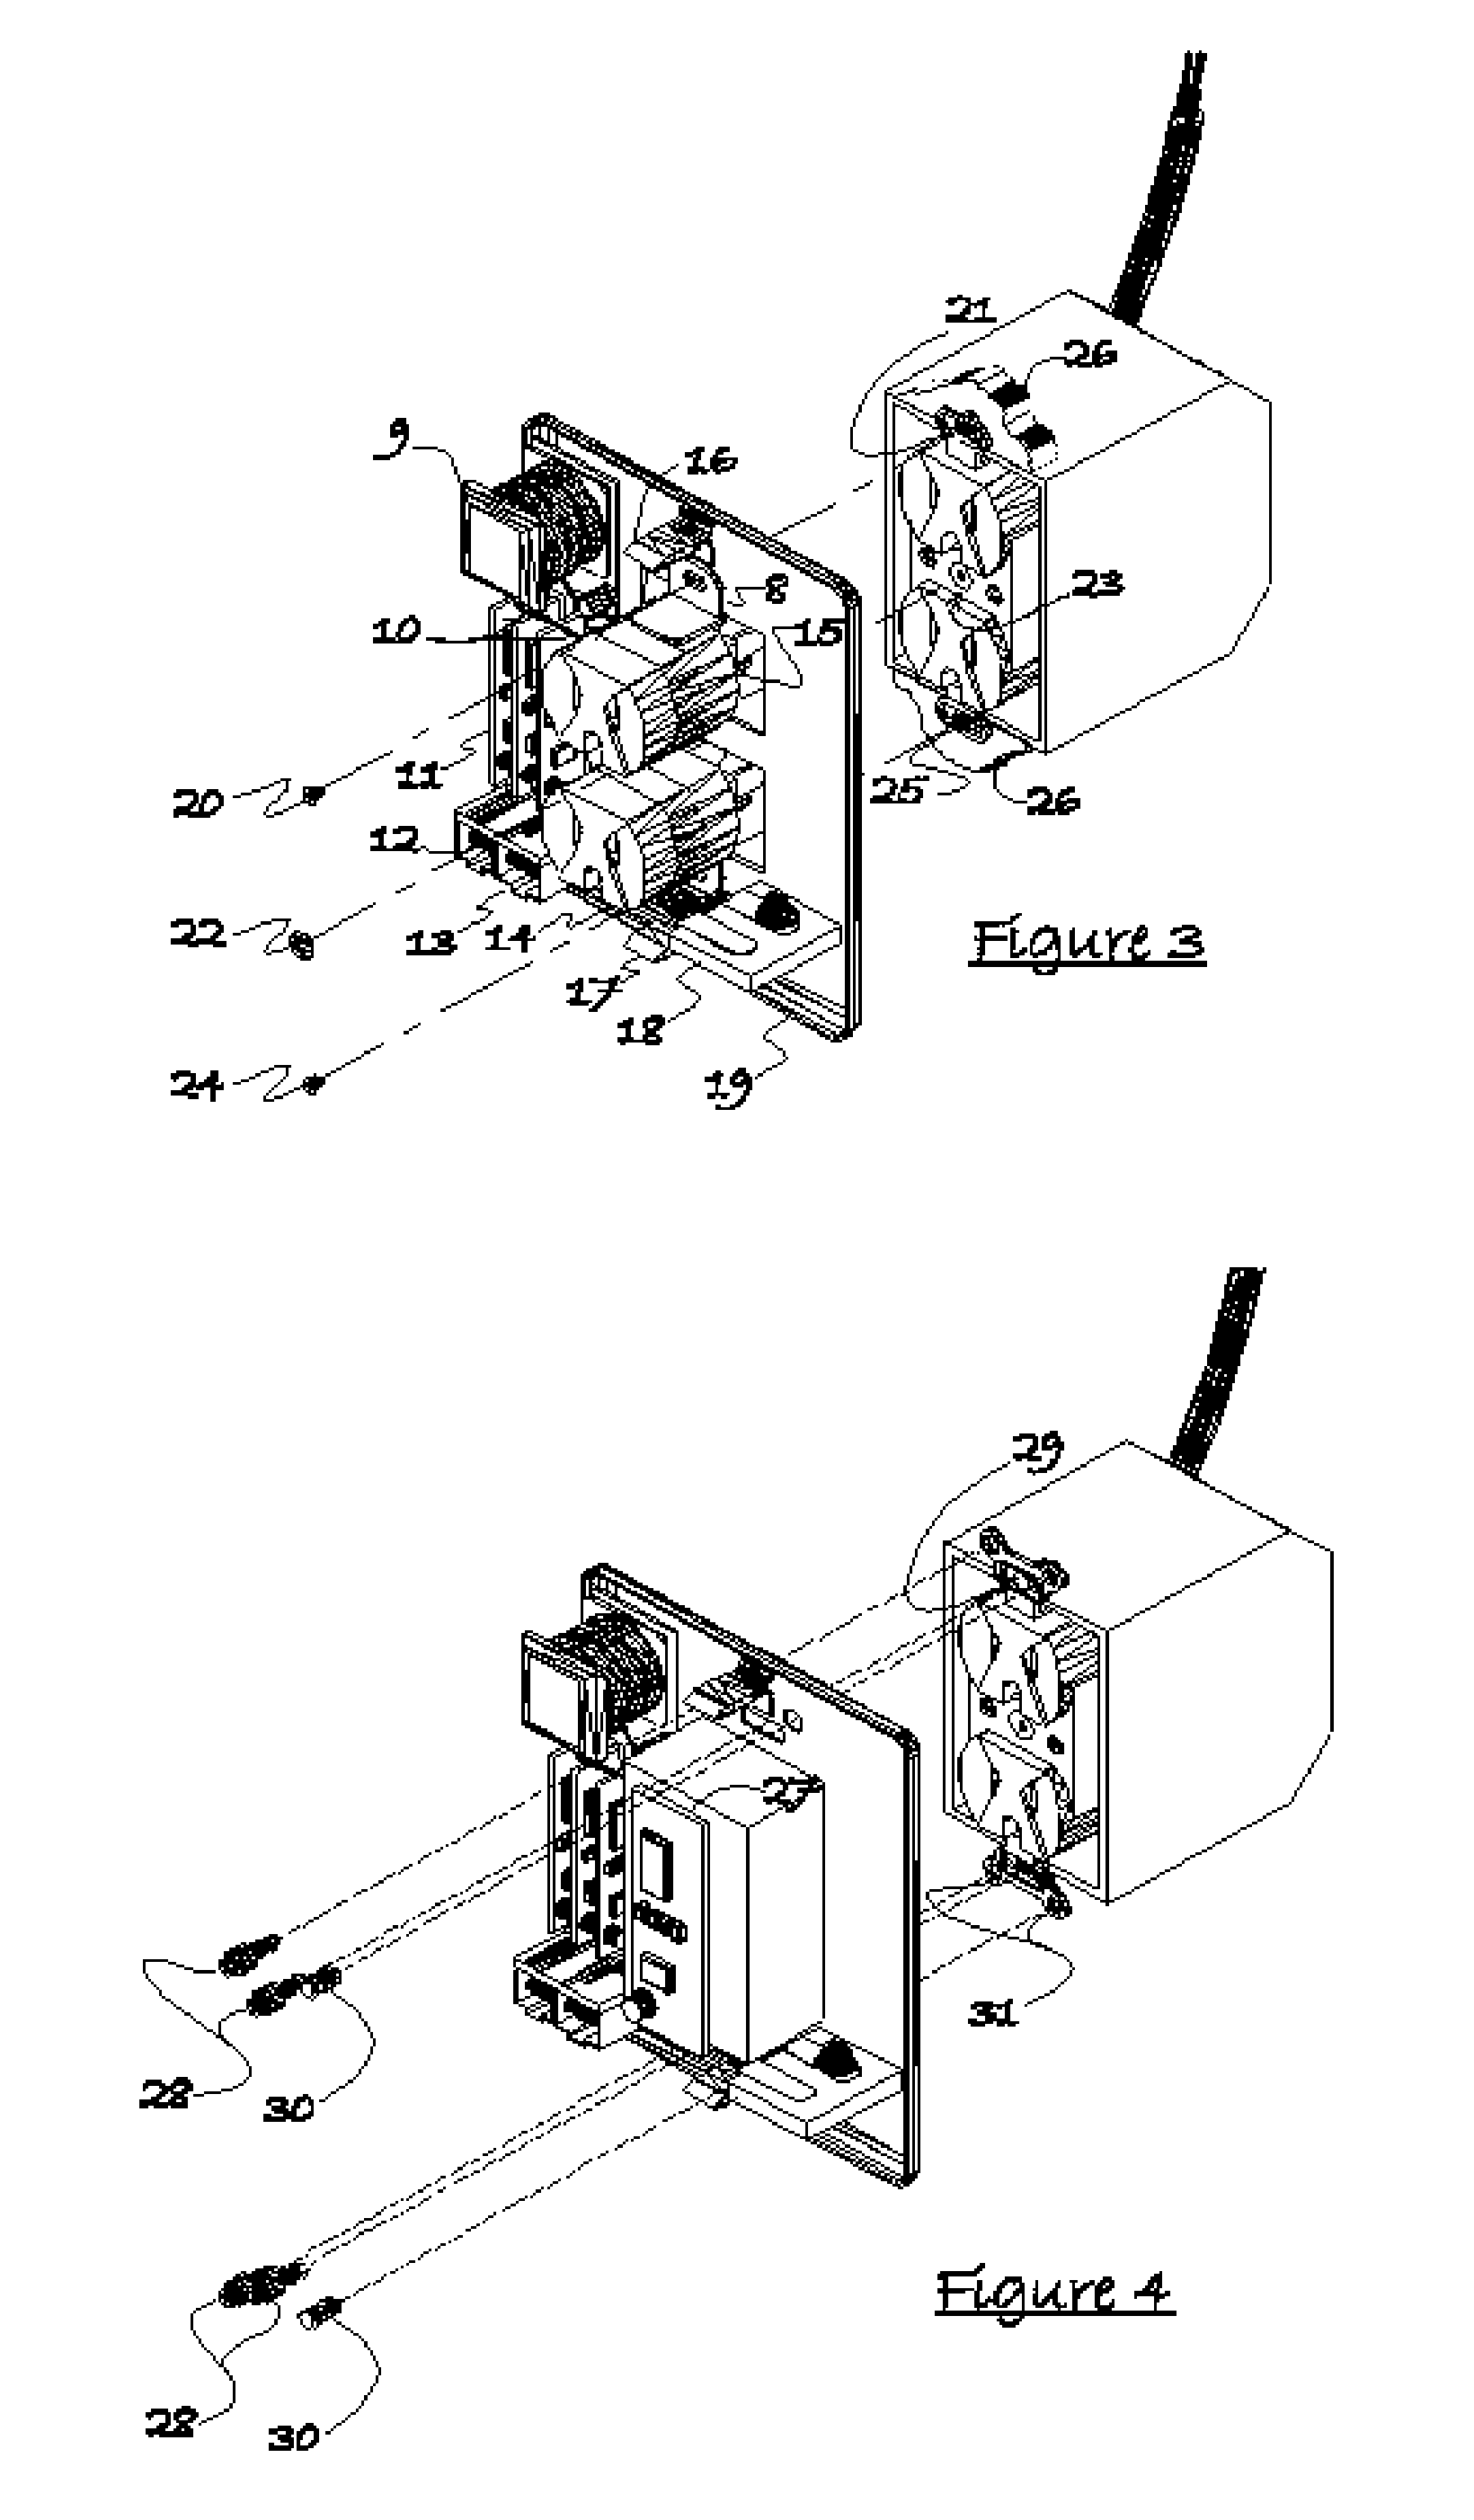 Apparatus that enables low cost installation of a secure and tamper proof assembly that accommodates lifeline support for power line communication devices